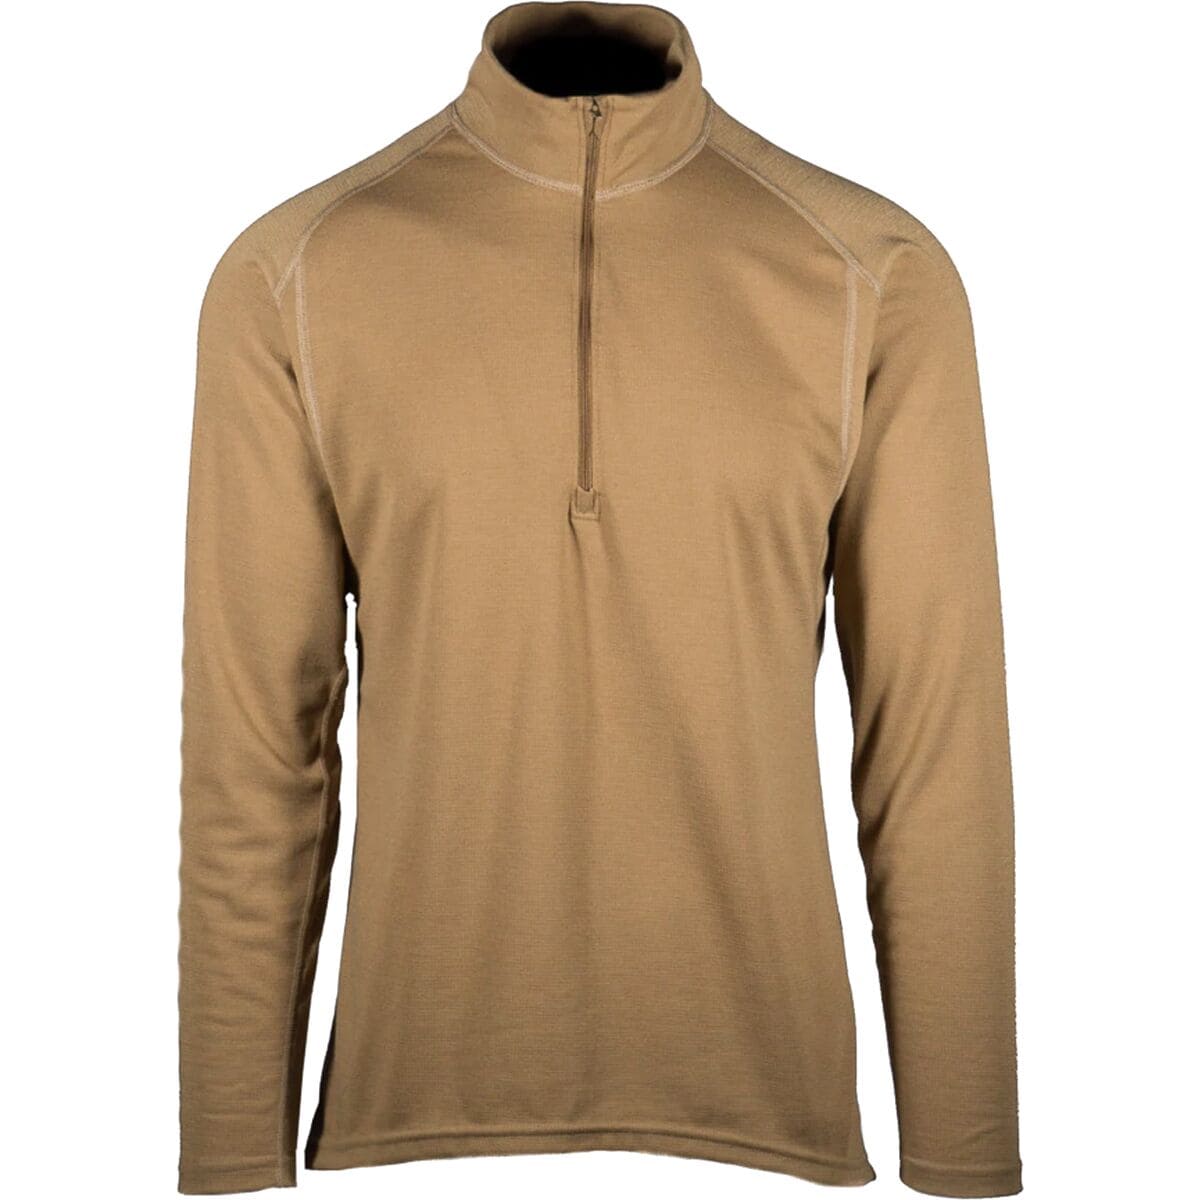 Beyond Clothing A1 Powerwool Pullover - Men's